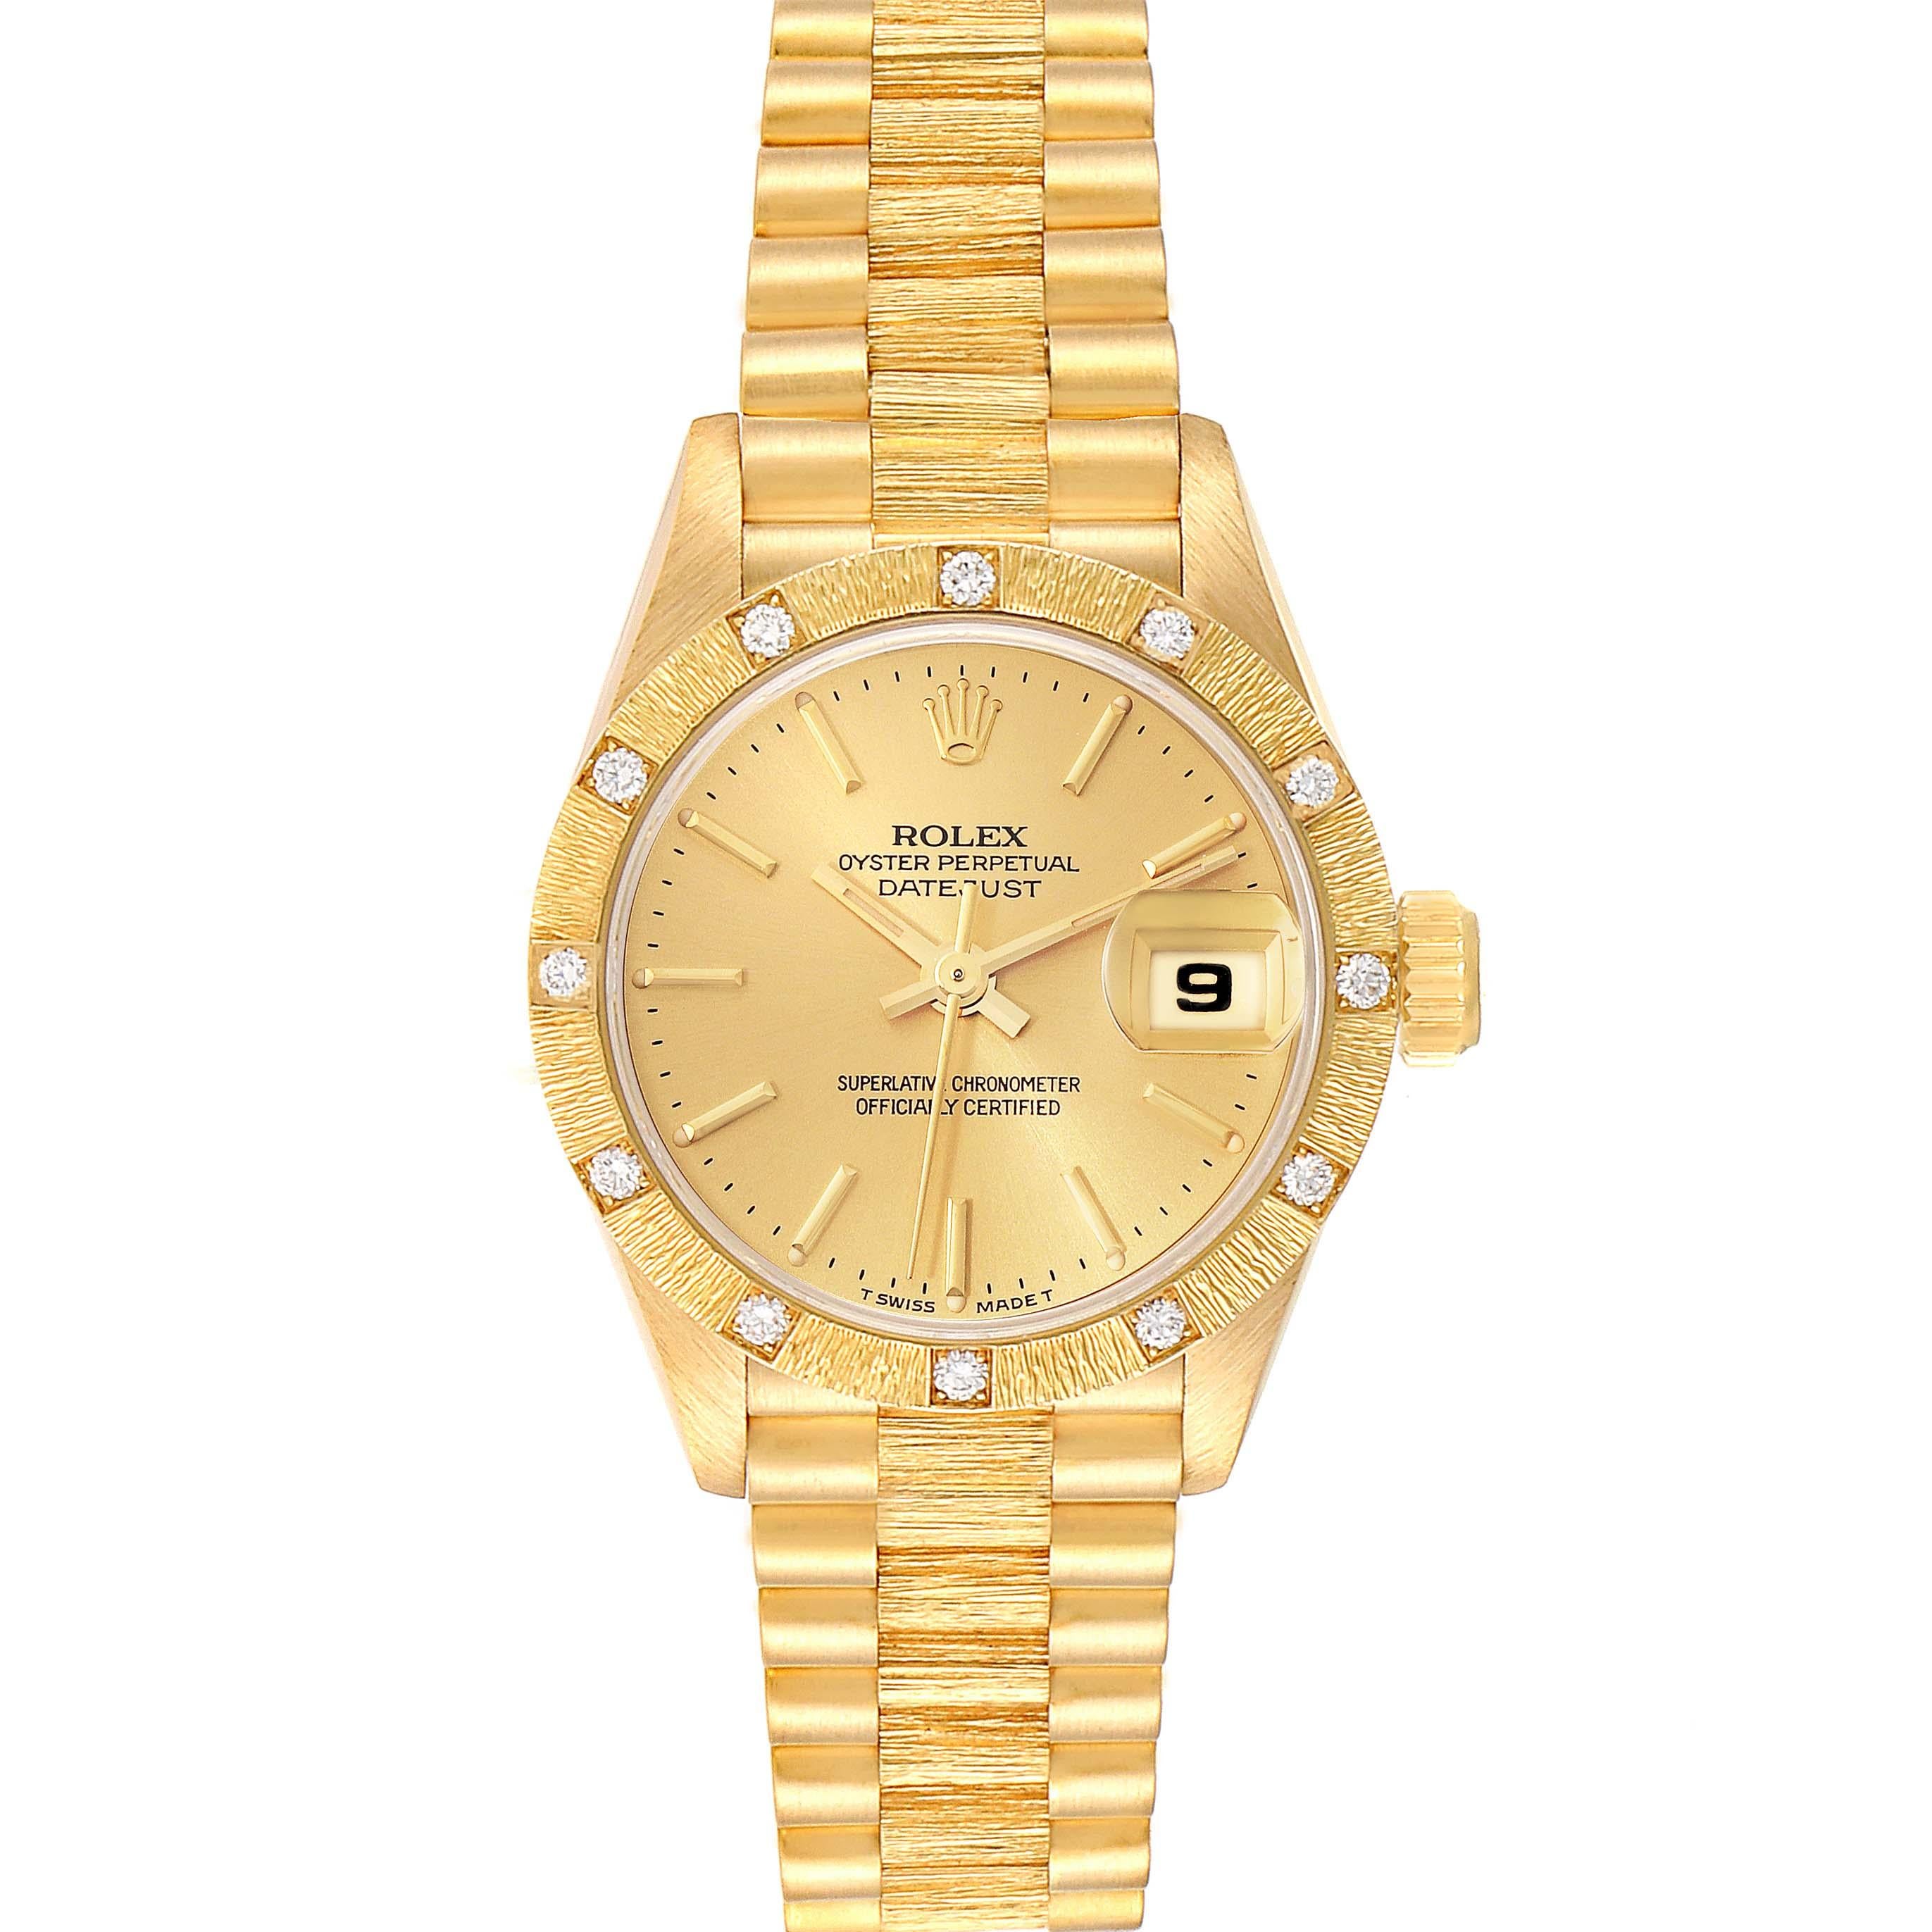 Rolex President Datejust Yellow Gold Diamond Ladies Watch 69288 Box Papers. Officially certified chronometer automatic self-winding movement. 18k yellow gold oyster case 26.0 mm in diameter. Rolex logo on crown. Original Rolex factory 18k yellow